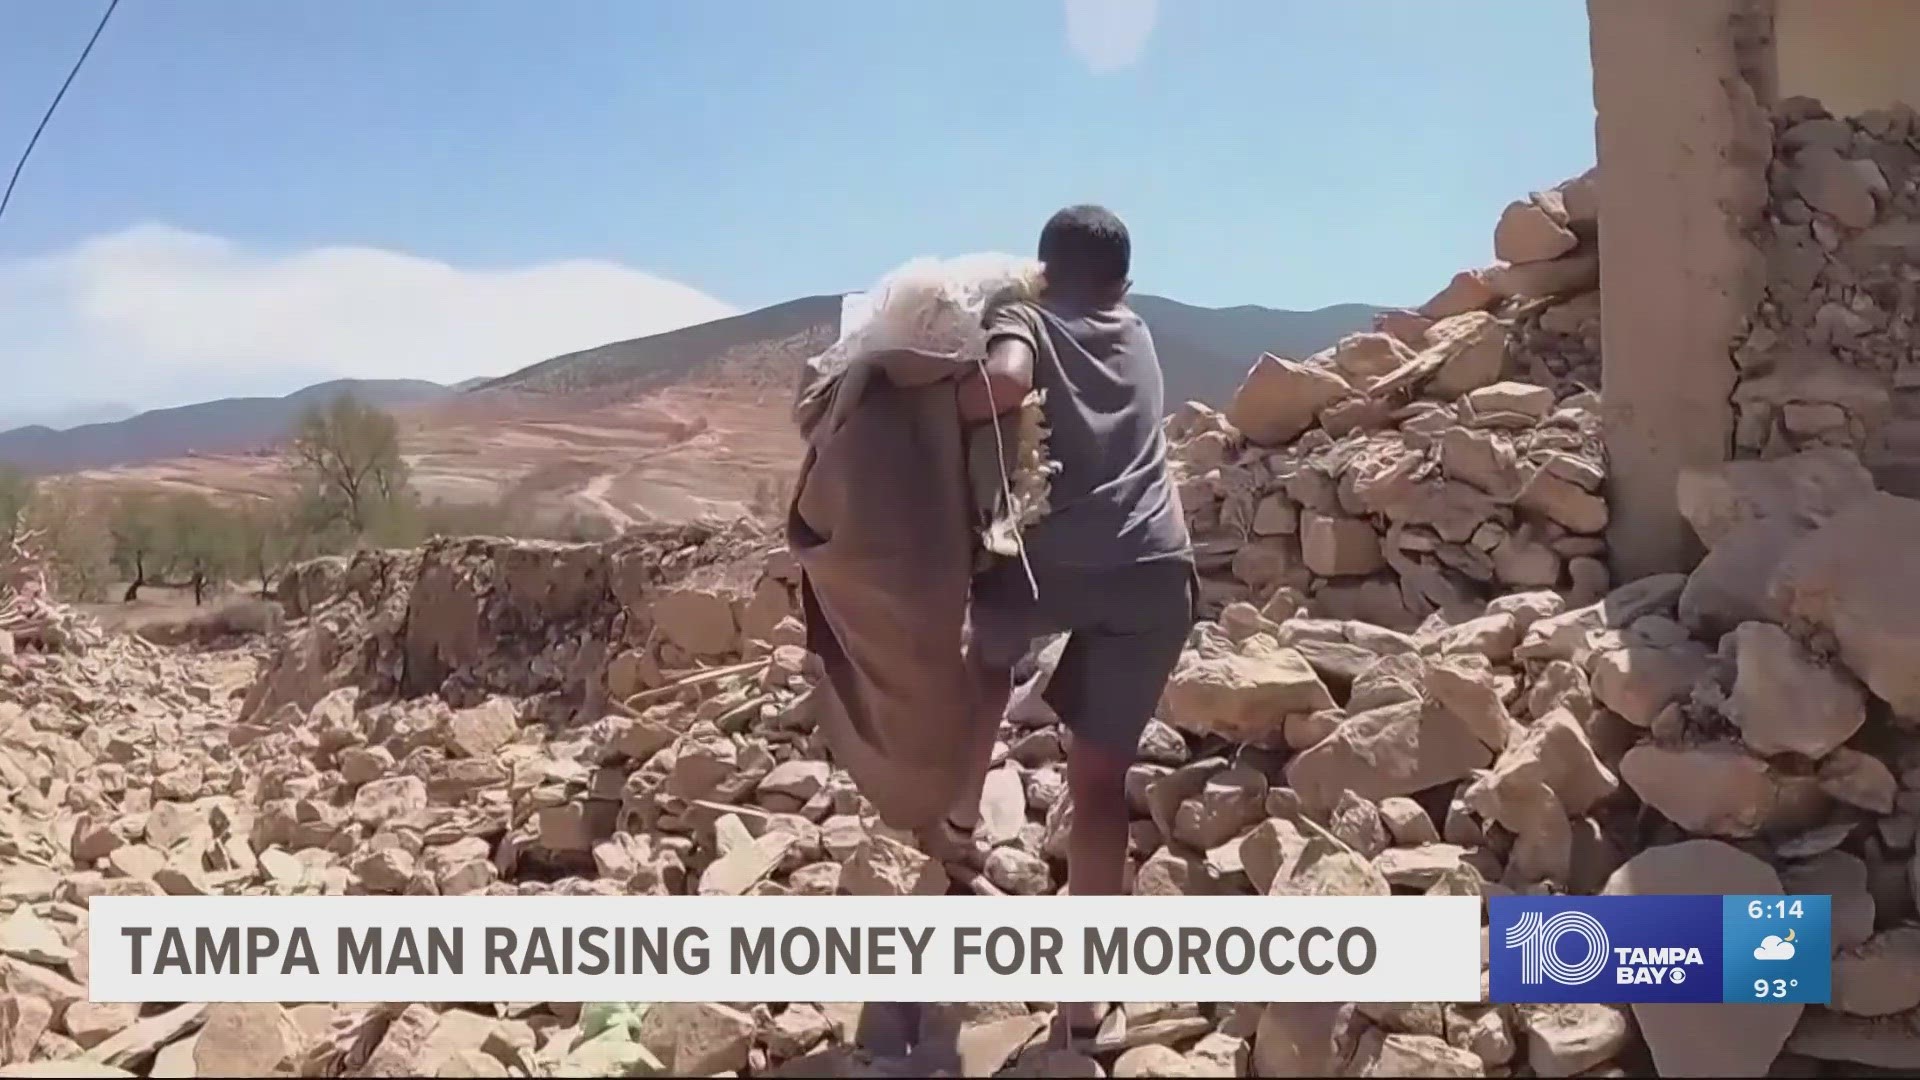 The man was born in Morocco and is trying to raise money to help those affected.